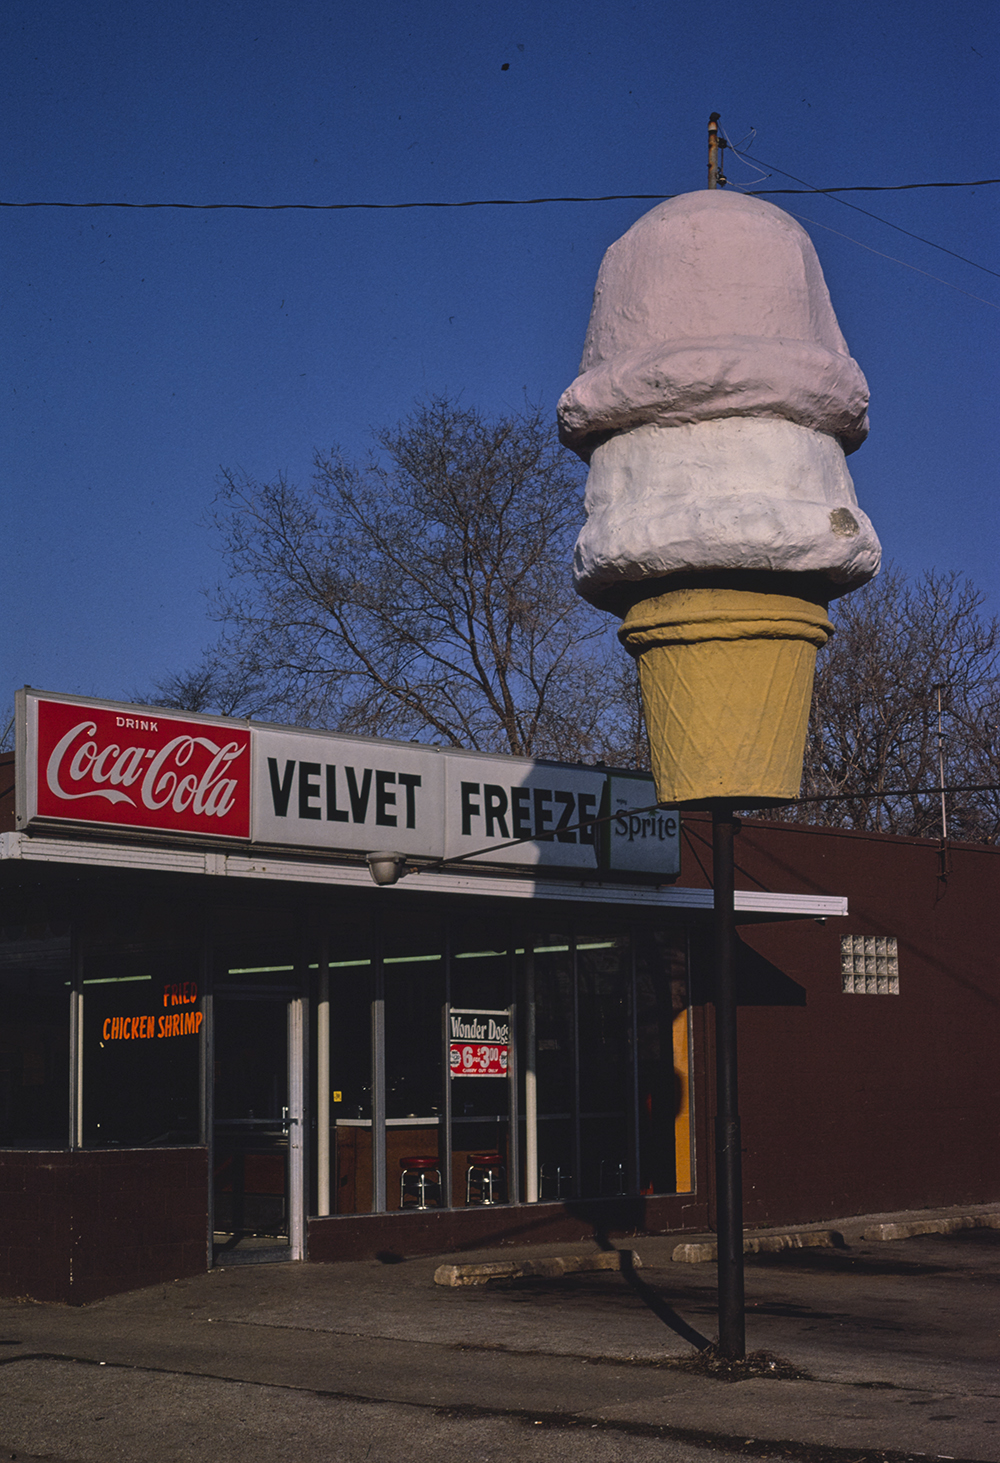 Photograph of Velvet Freeze ice cream sign, Peoria, Illinois, 1980, by John Margolies. Library of Congress, Prints and Photographs Division, John Margolies Roadside America Photograph Archive.